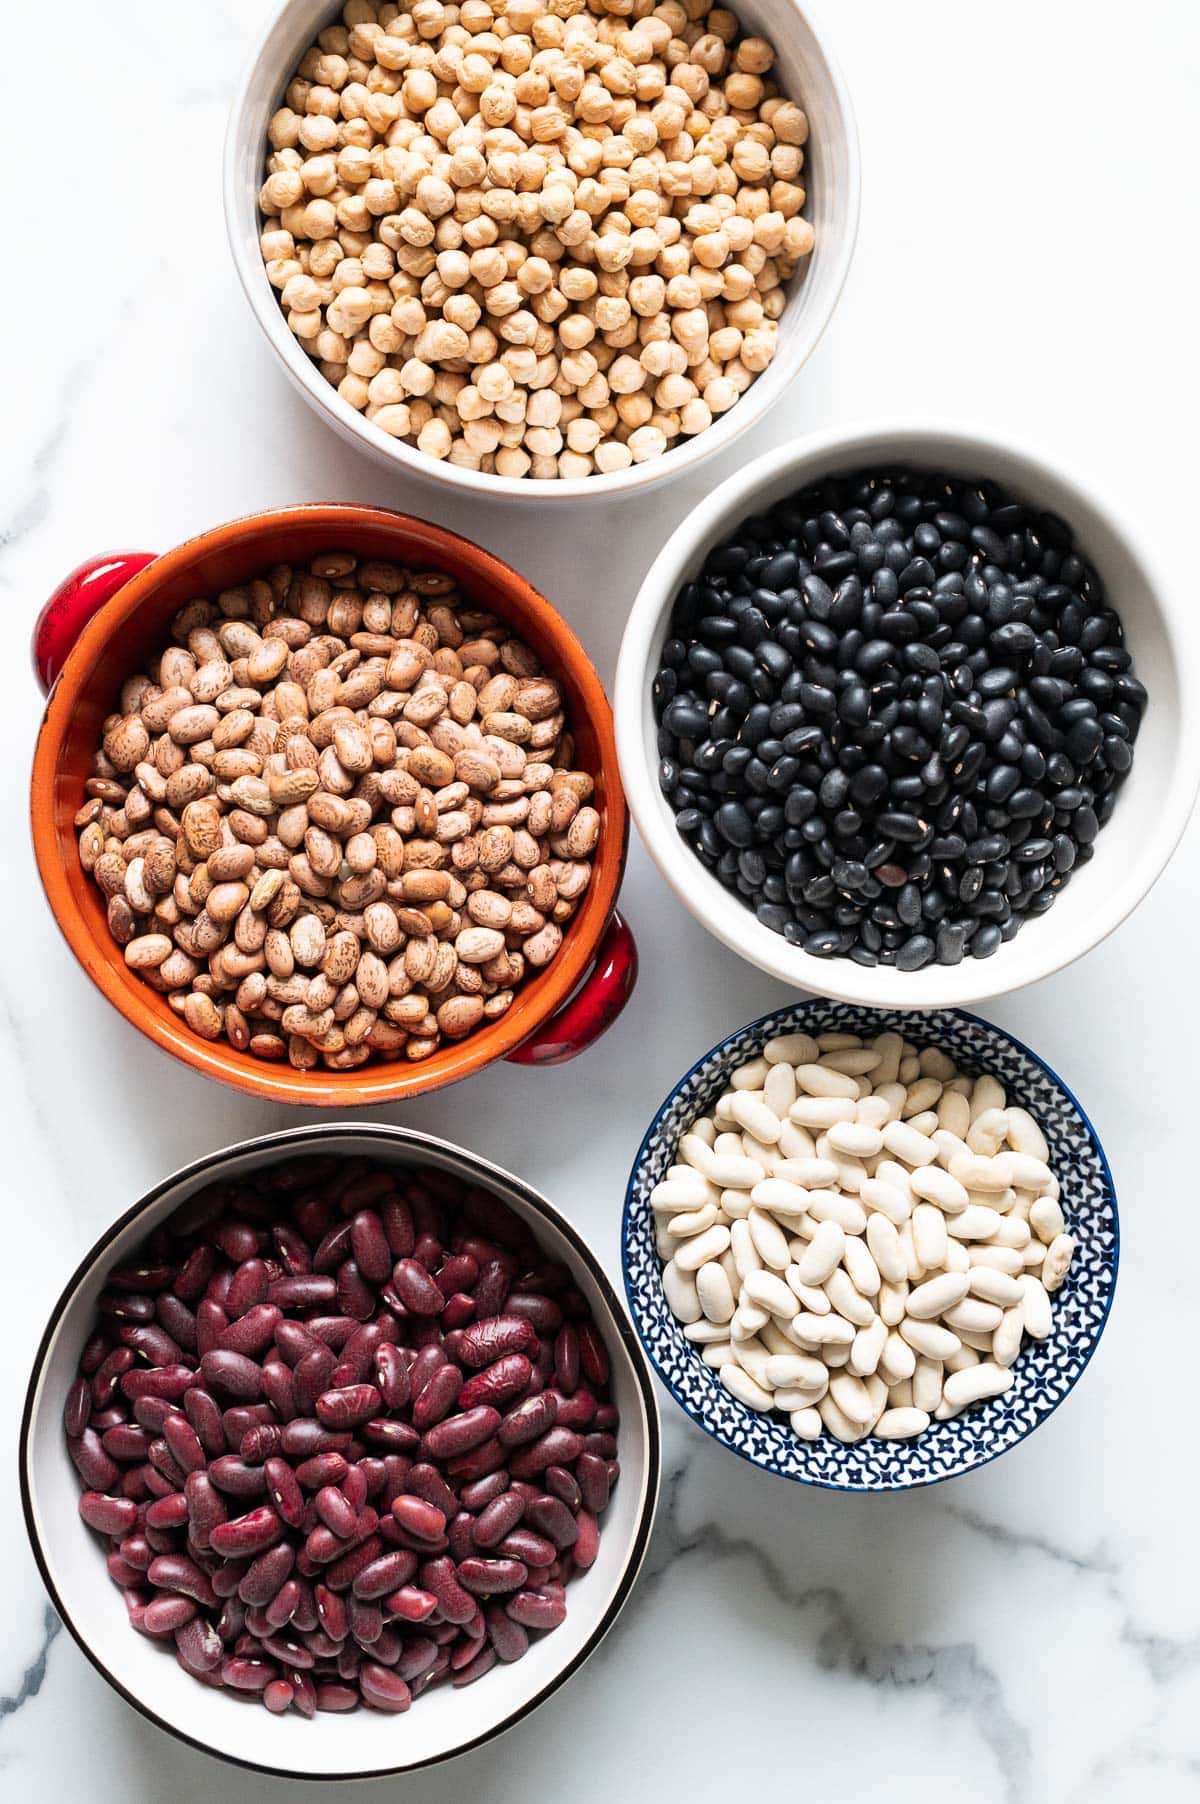 Five bowls with various dried beans.